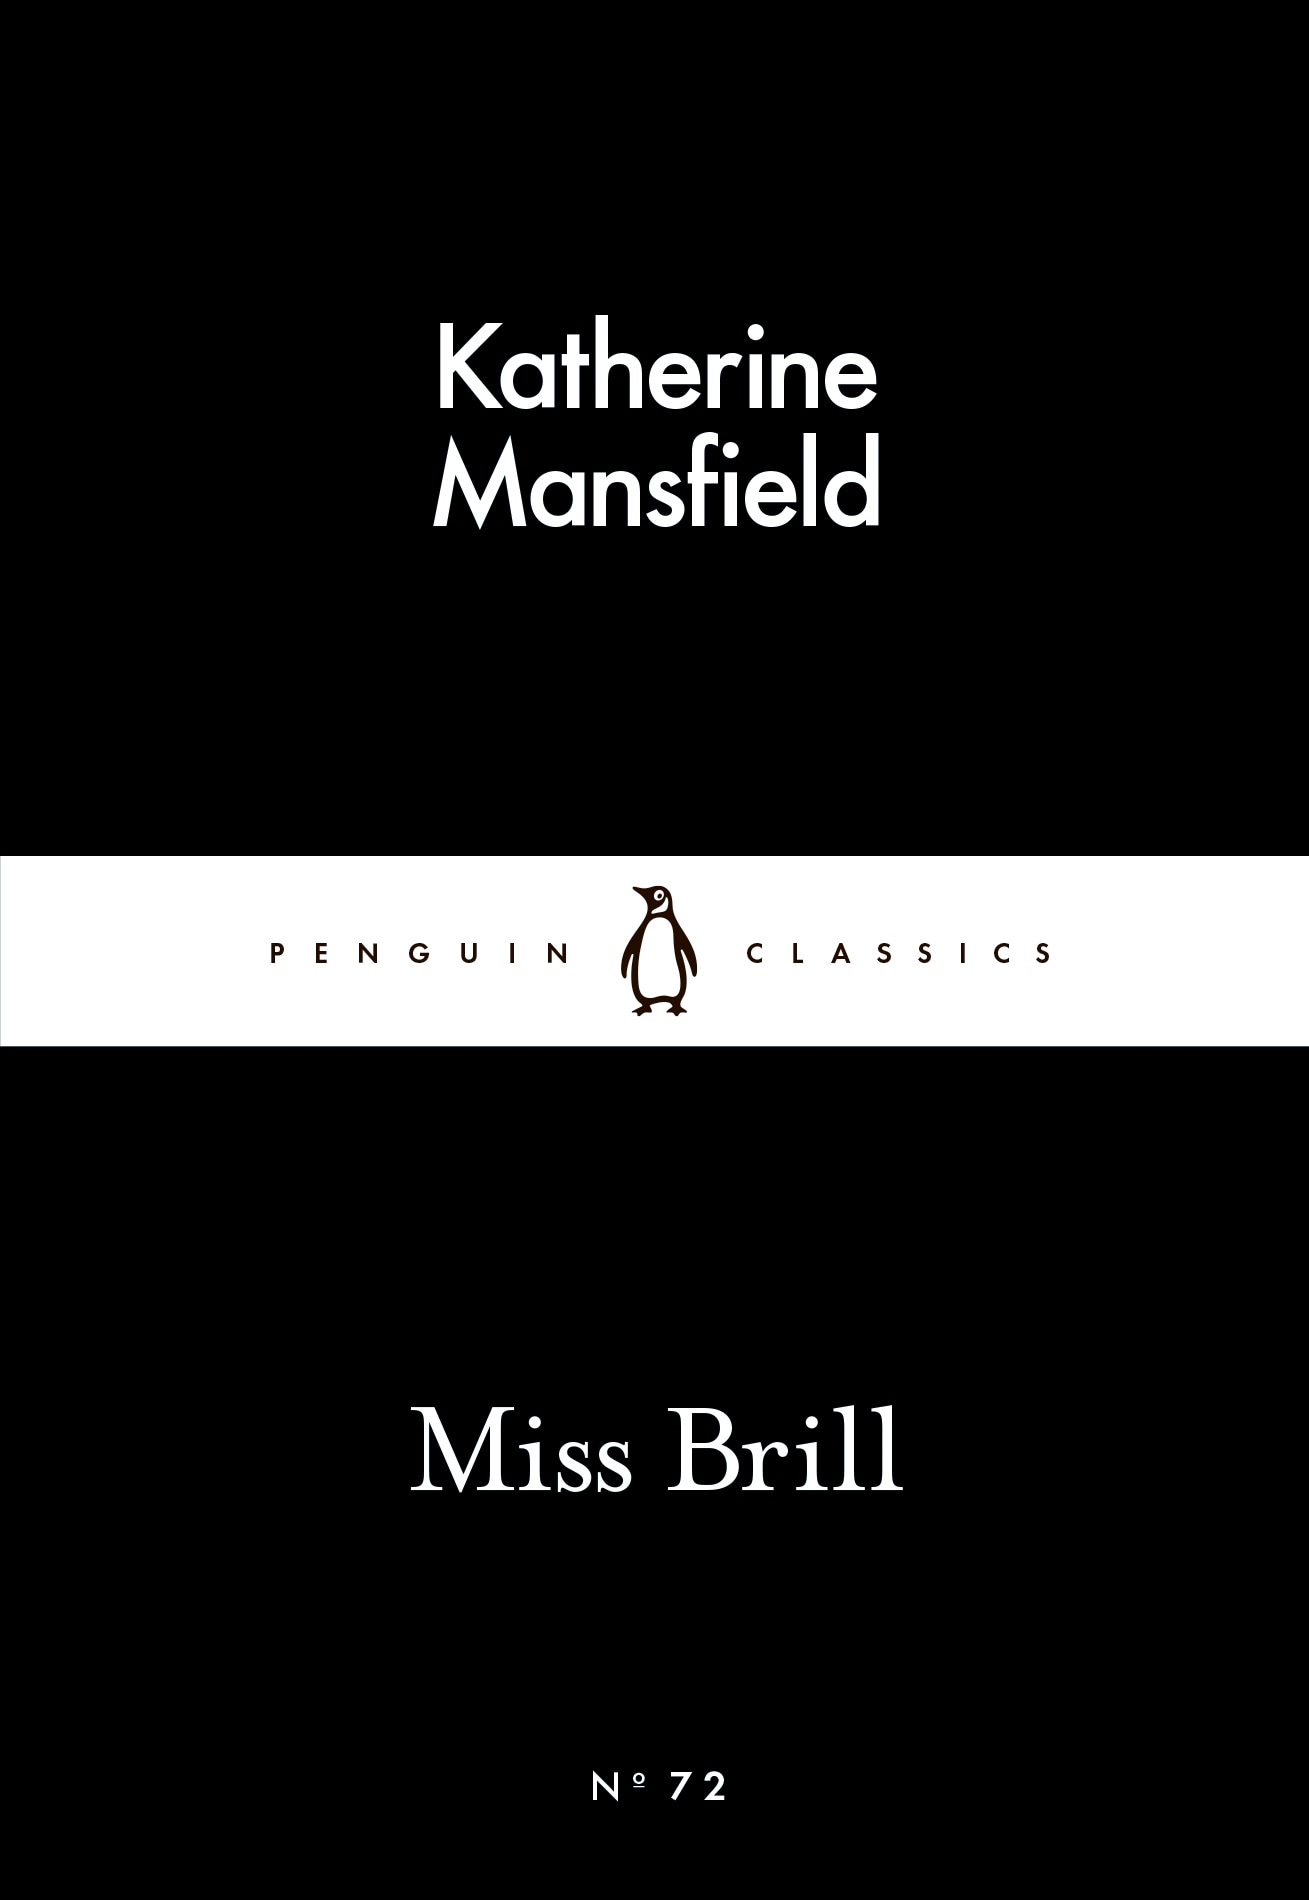 Book “Miss Brill” by Katherine Mansfield — February 26, 2015